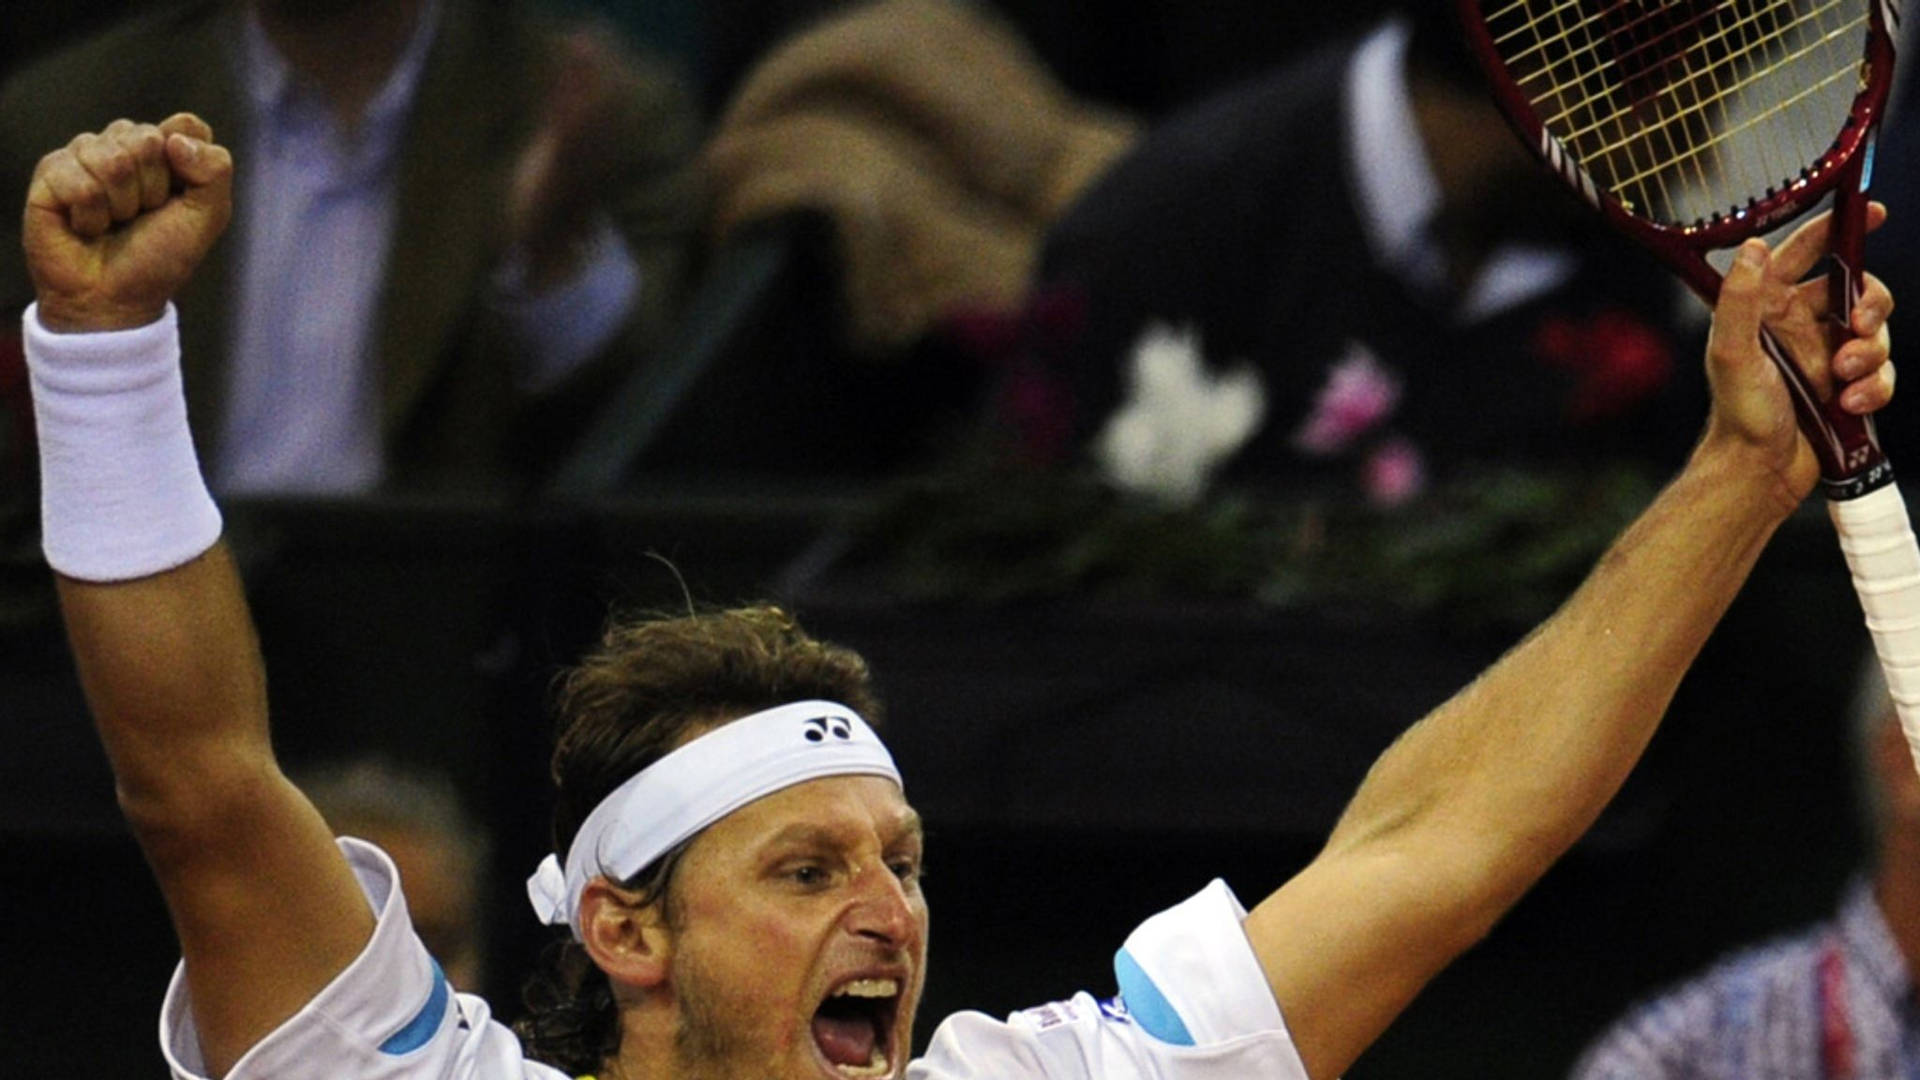 Triumphant David Nalbandian Celebrating a Victory on the Court Wallpaper